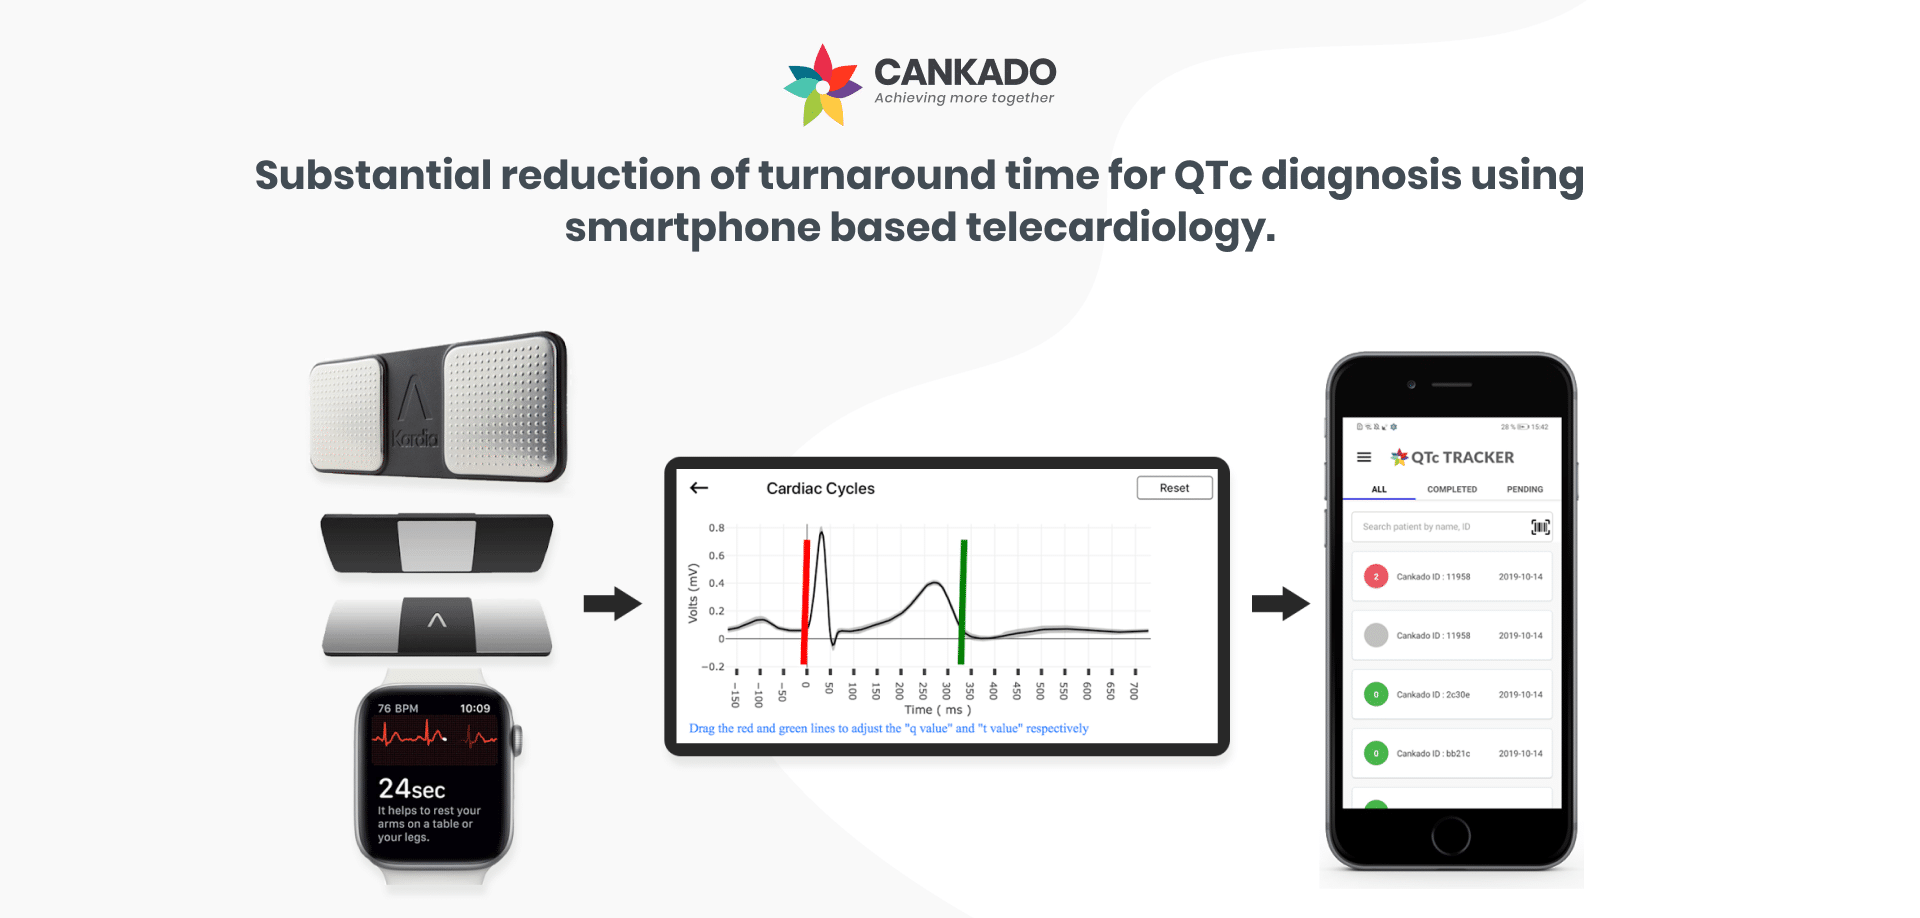 Substantial reduction of turnaround time for QTc diagnosis using smartphone based telecardiology.